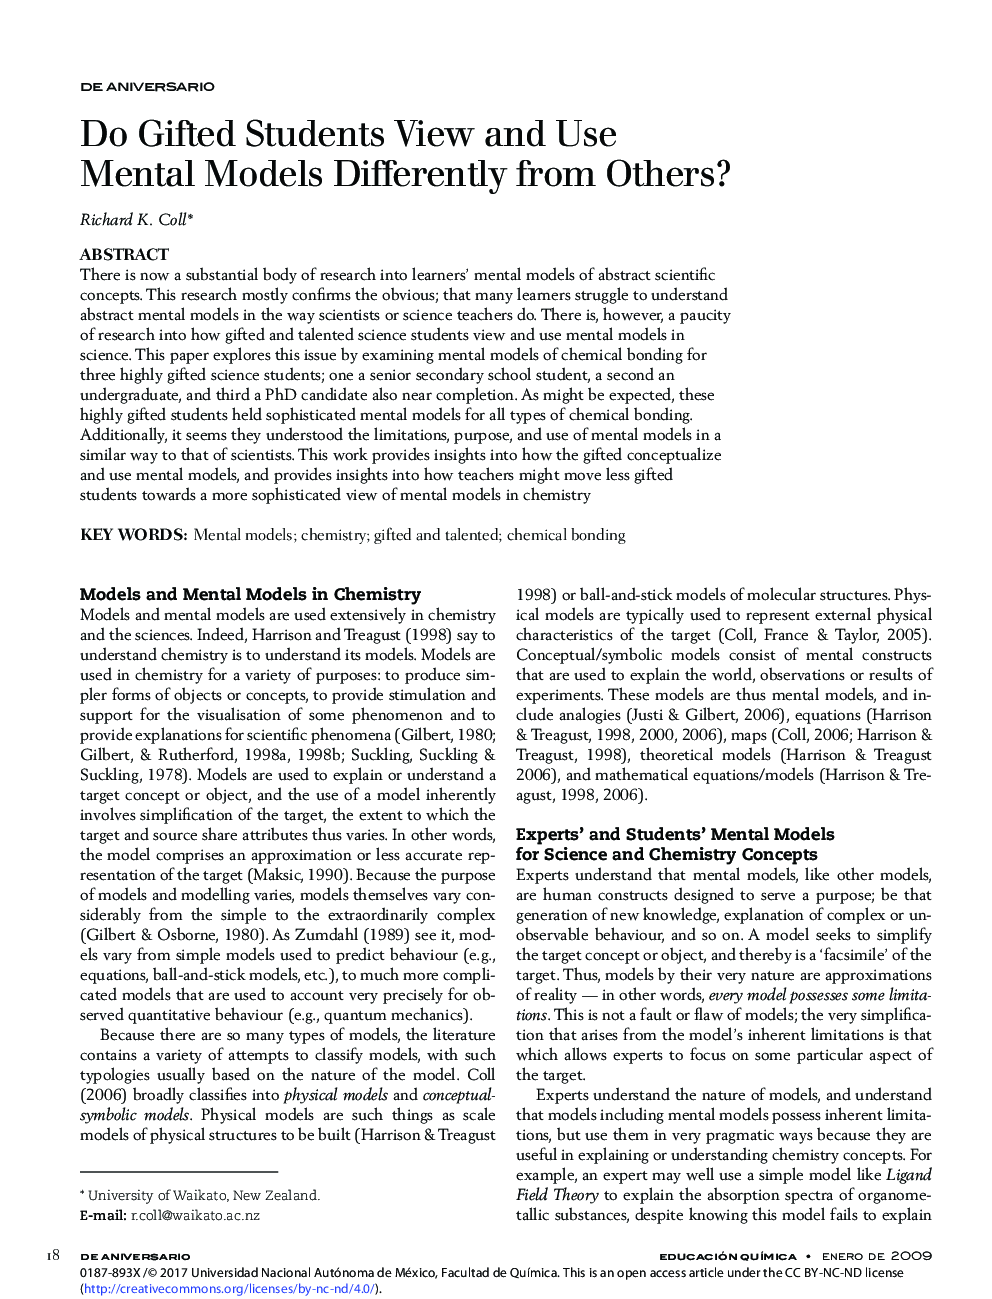 Do Gifted Students View and Use Mental Models Differently from Others?